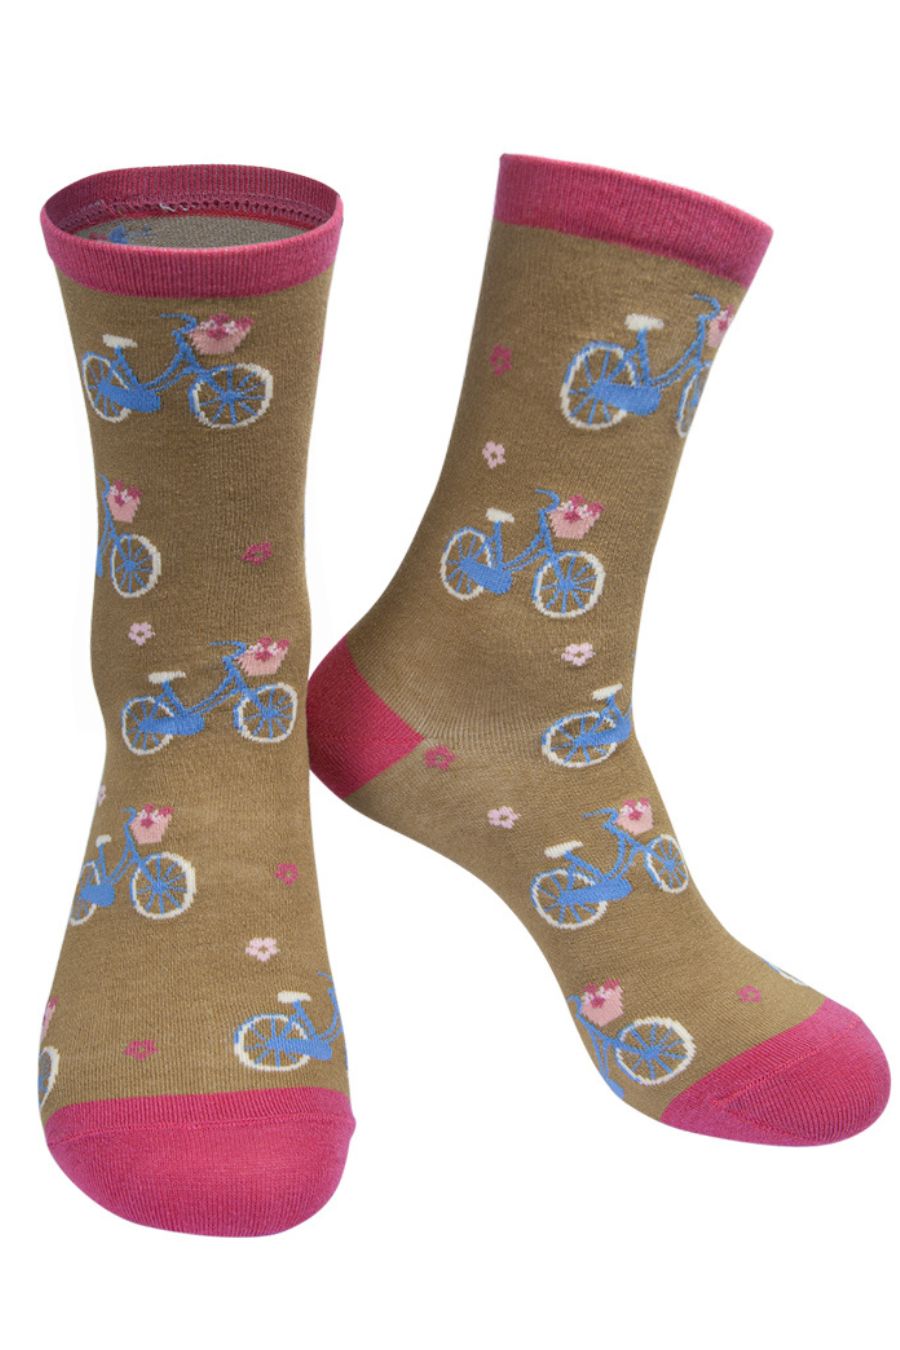 mustard and pink ankle socks with an all over bicycle print 